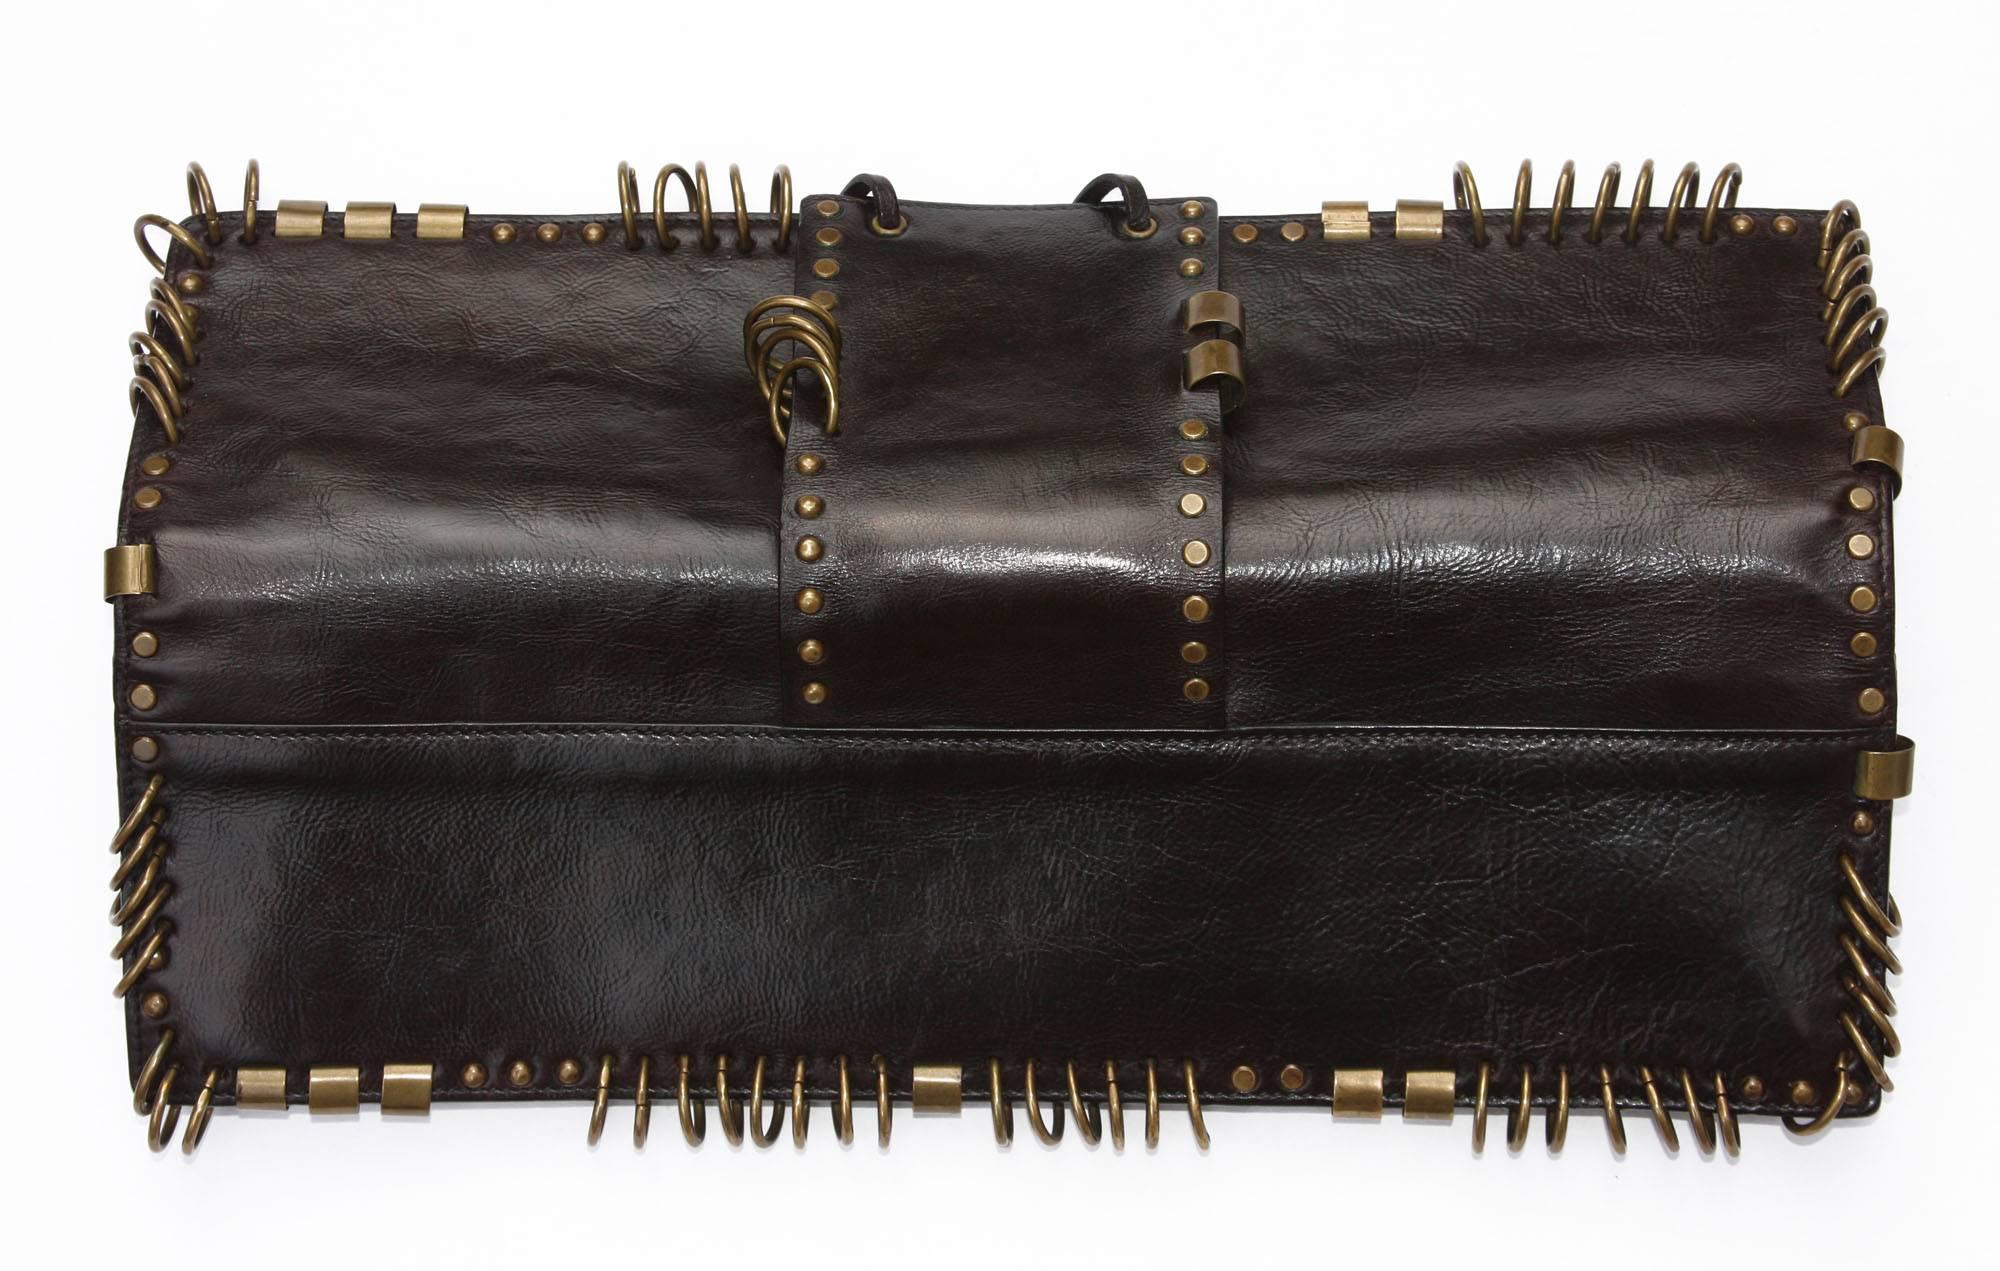 Very Rare dark brown leather Clutch with brass hardware designed by Tom Ford for Yves Saint Laurent dating to Spring of 2002.
Measurements: L - 14 inches, H - 4 inches.
N 95928-000926
Excellent Condition.
Natural aged on brass hardware (easy to